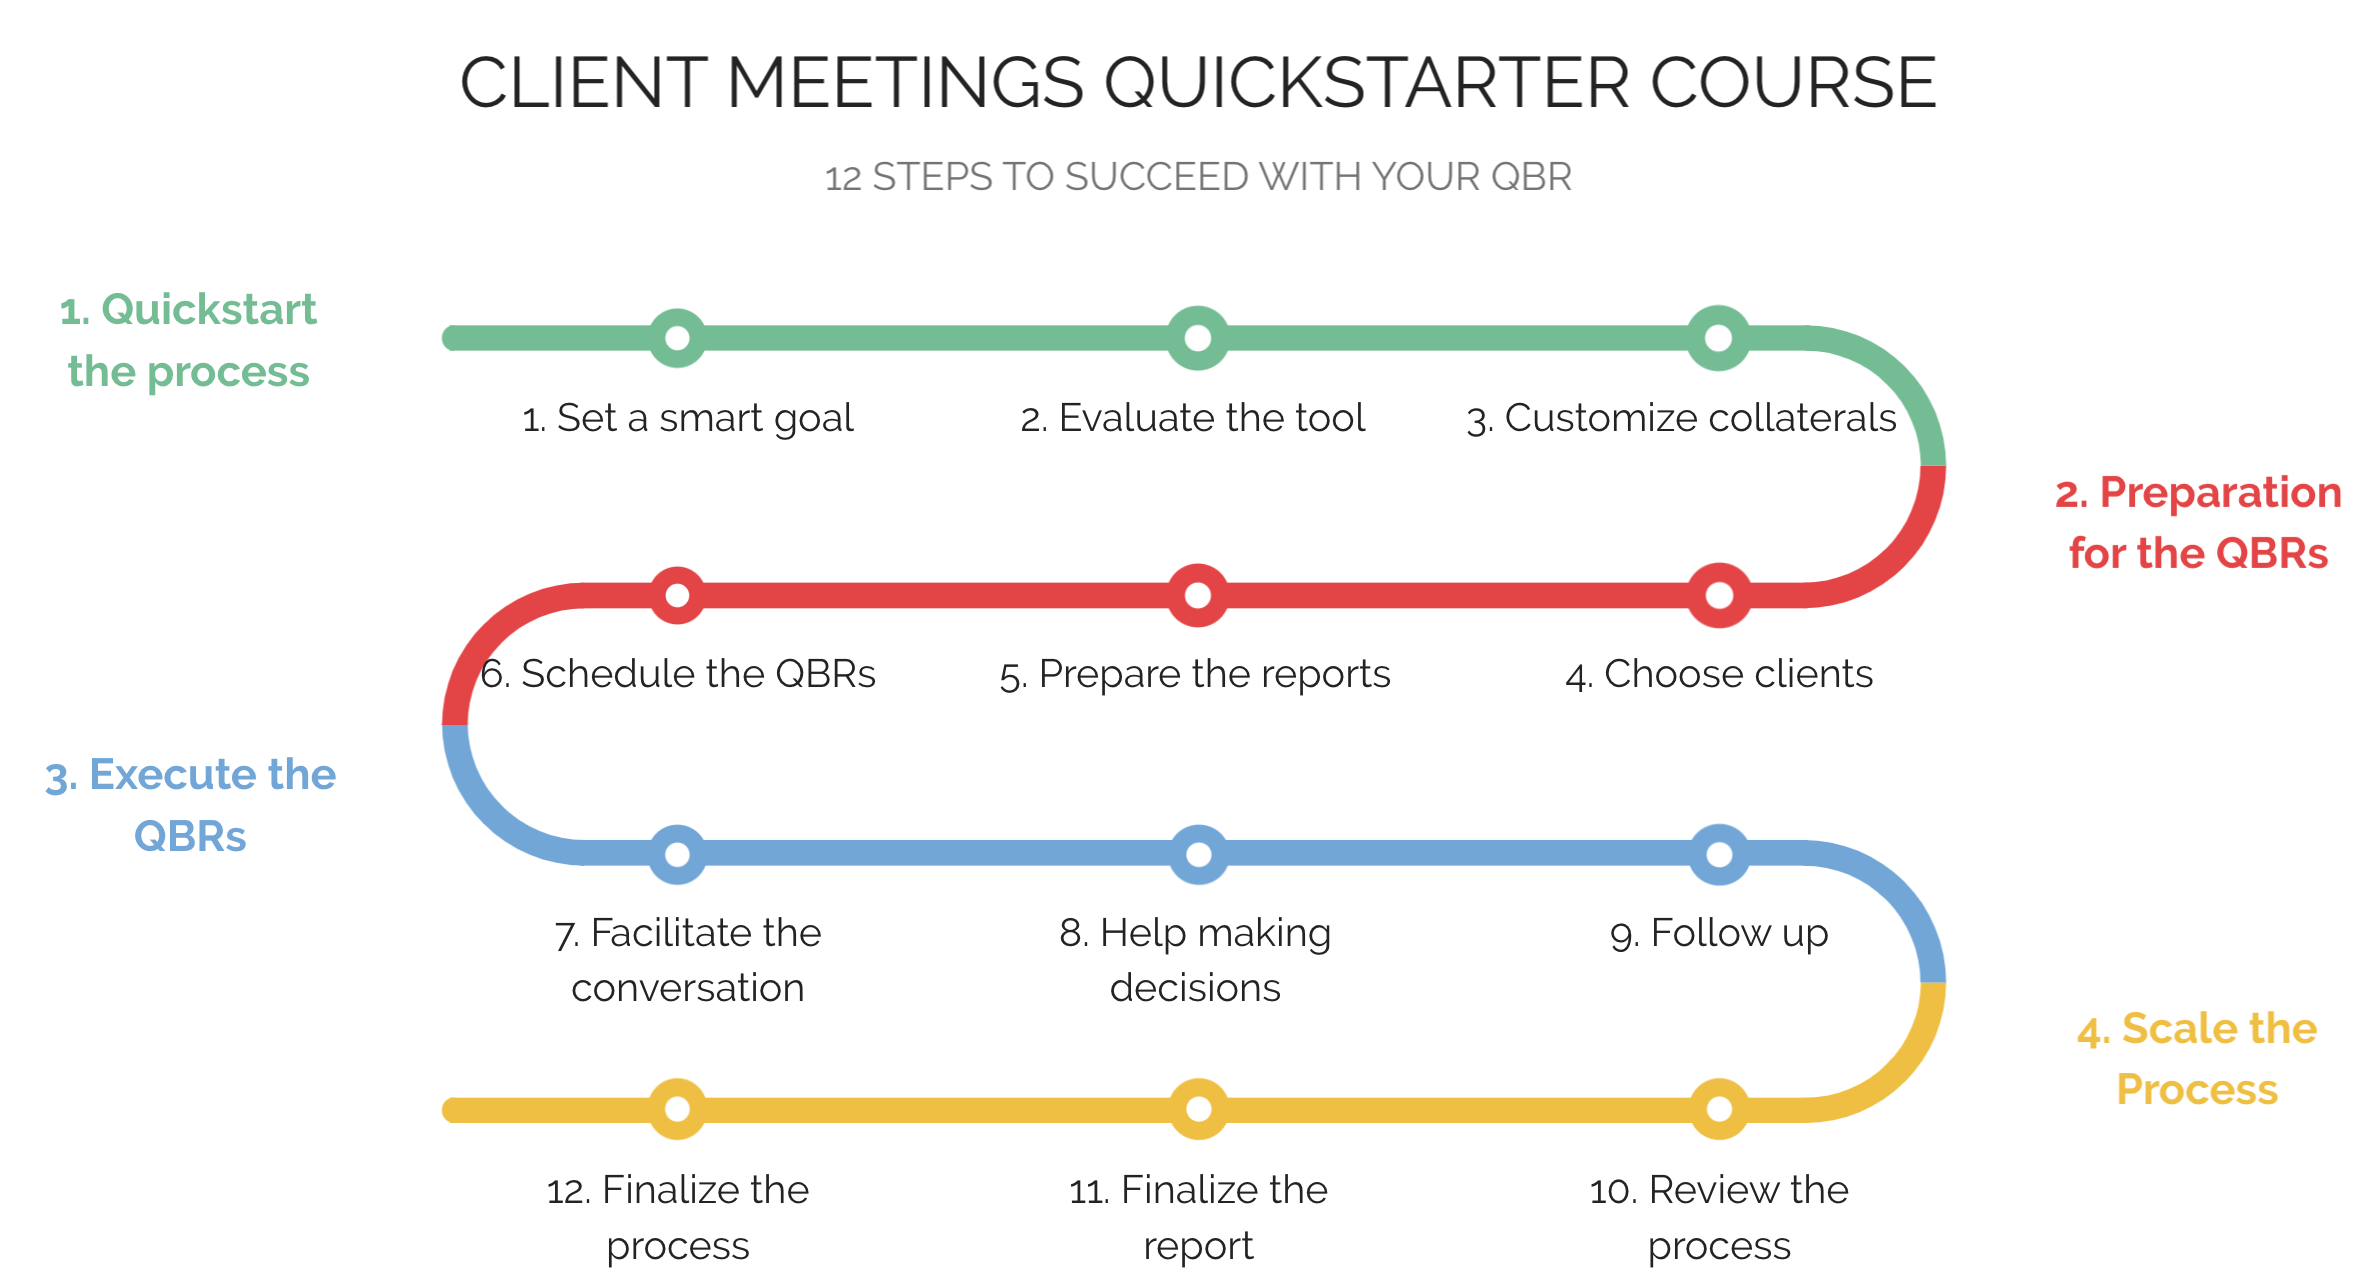 12 steps to succeed with your QBR